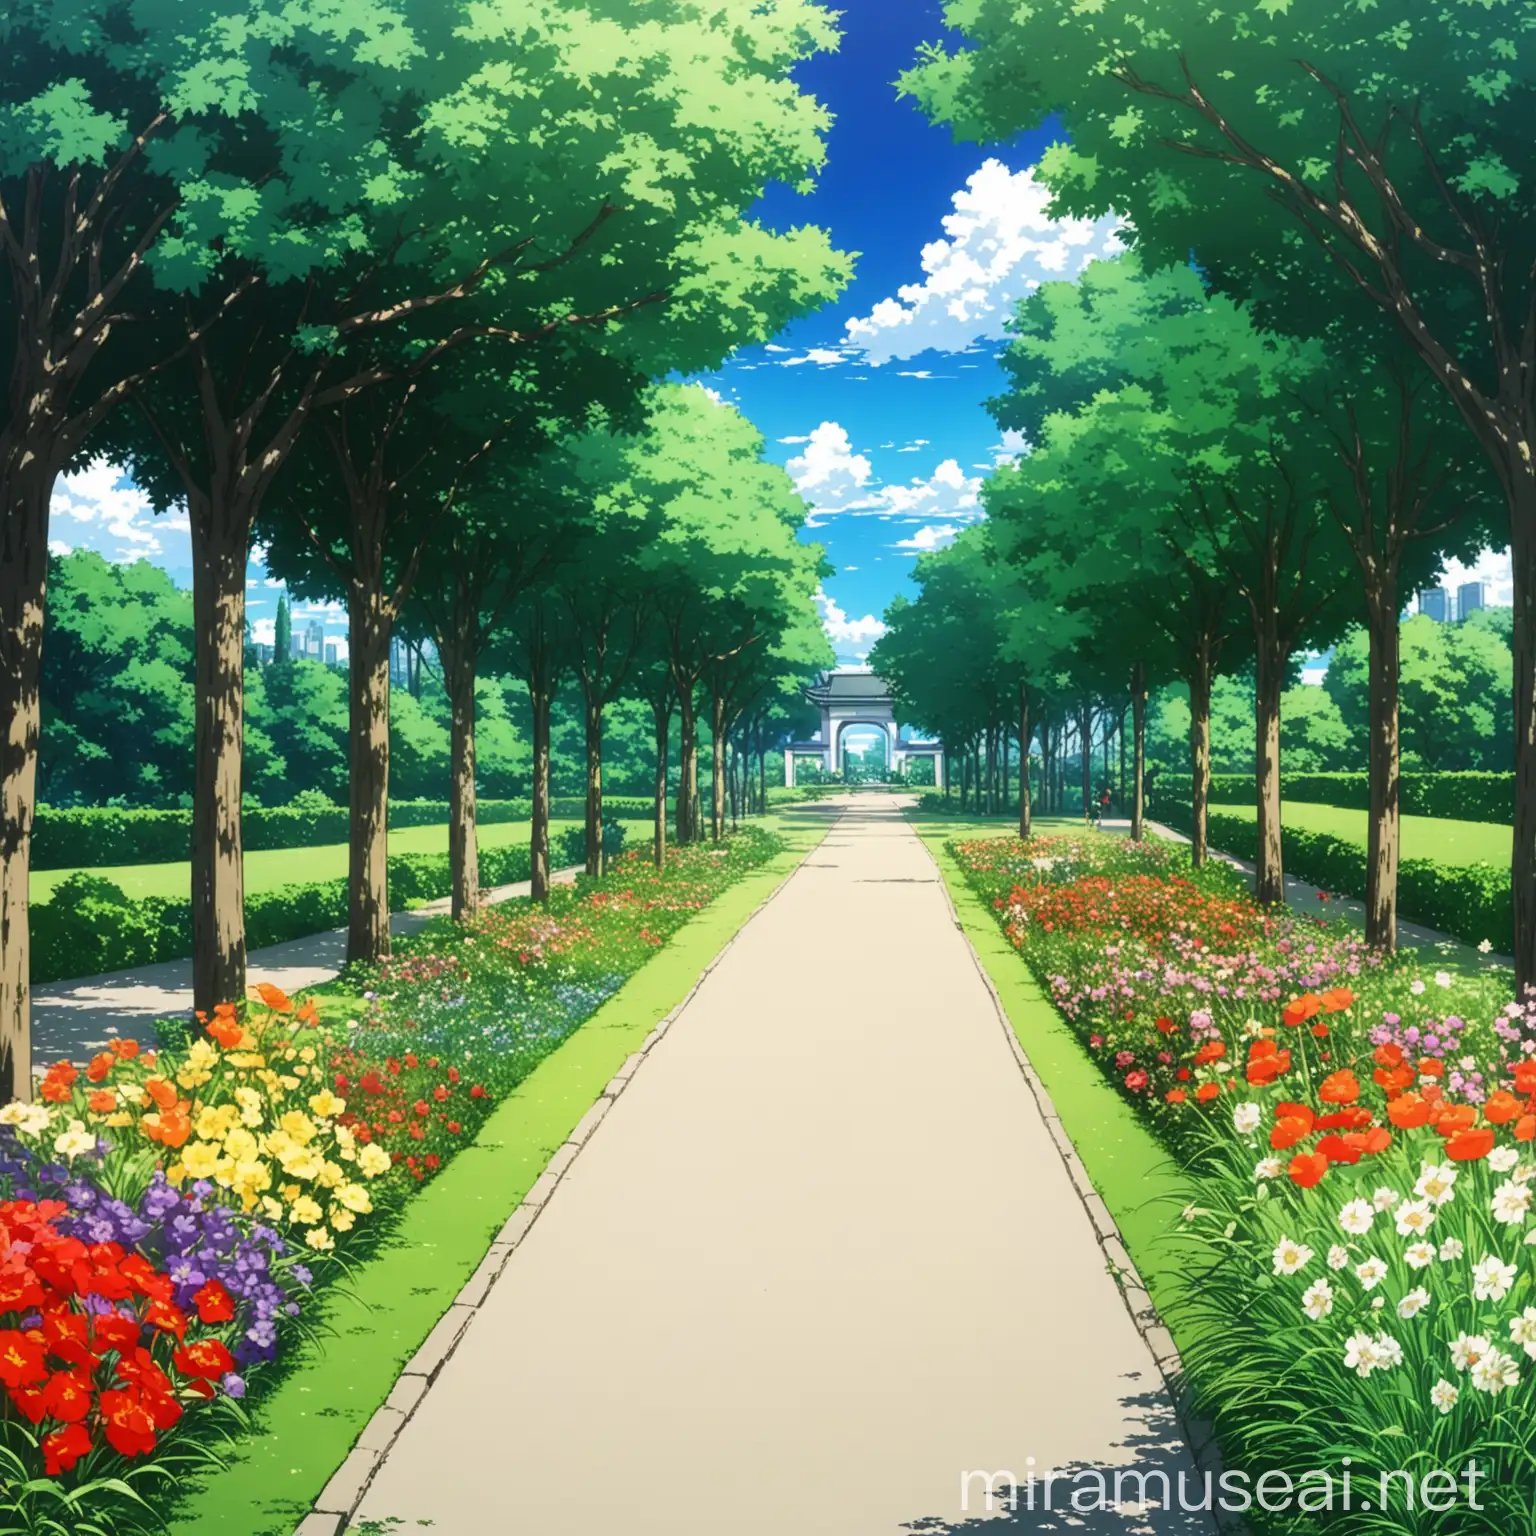 Anime Scene of a Picturesque Public Garden with a Spacious GrassFilled Pathway